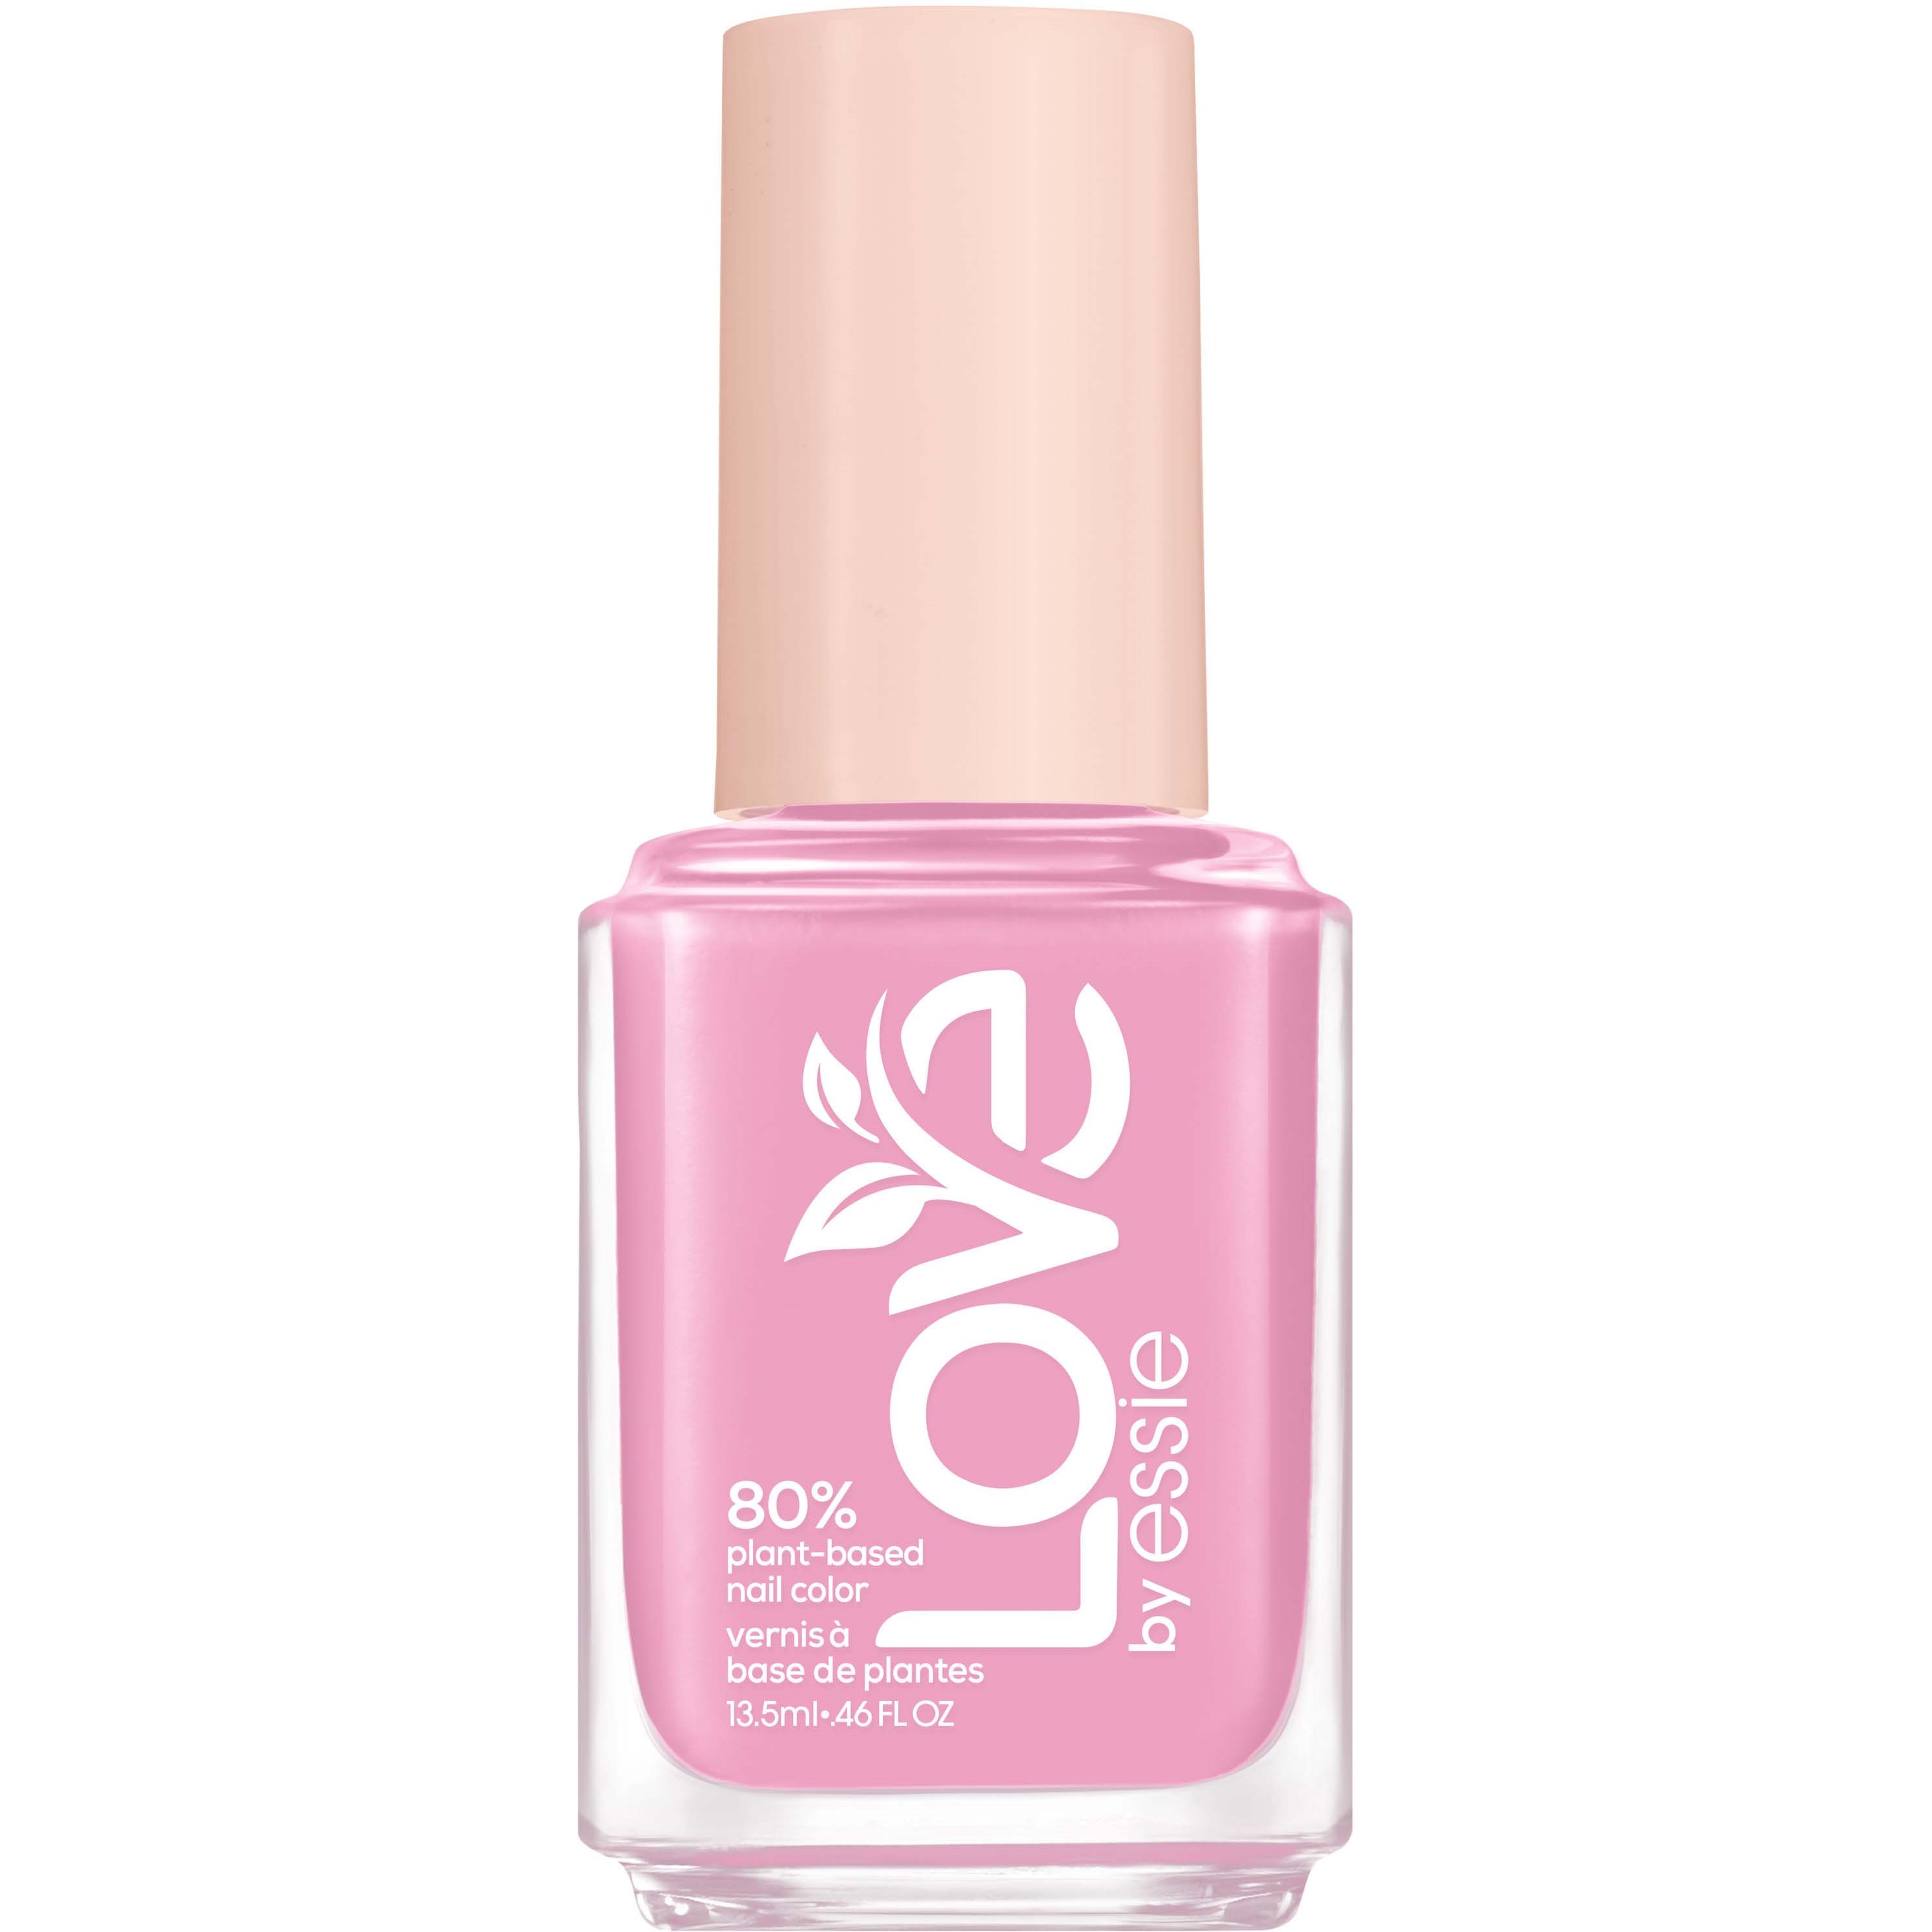 Essie LOVE by Essie 80% Plant-based Nail Color 160 Carefree But Caring